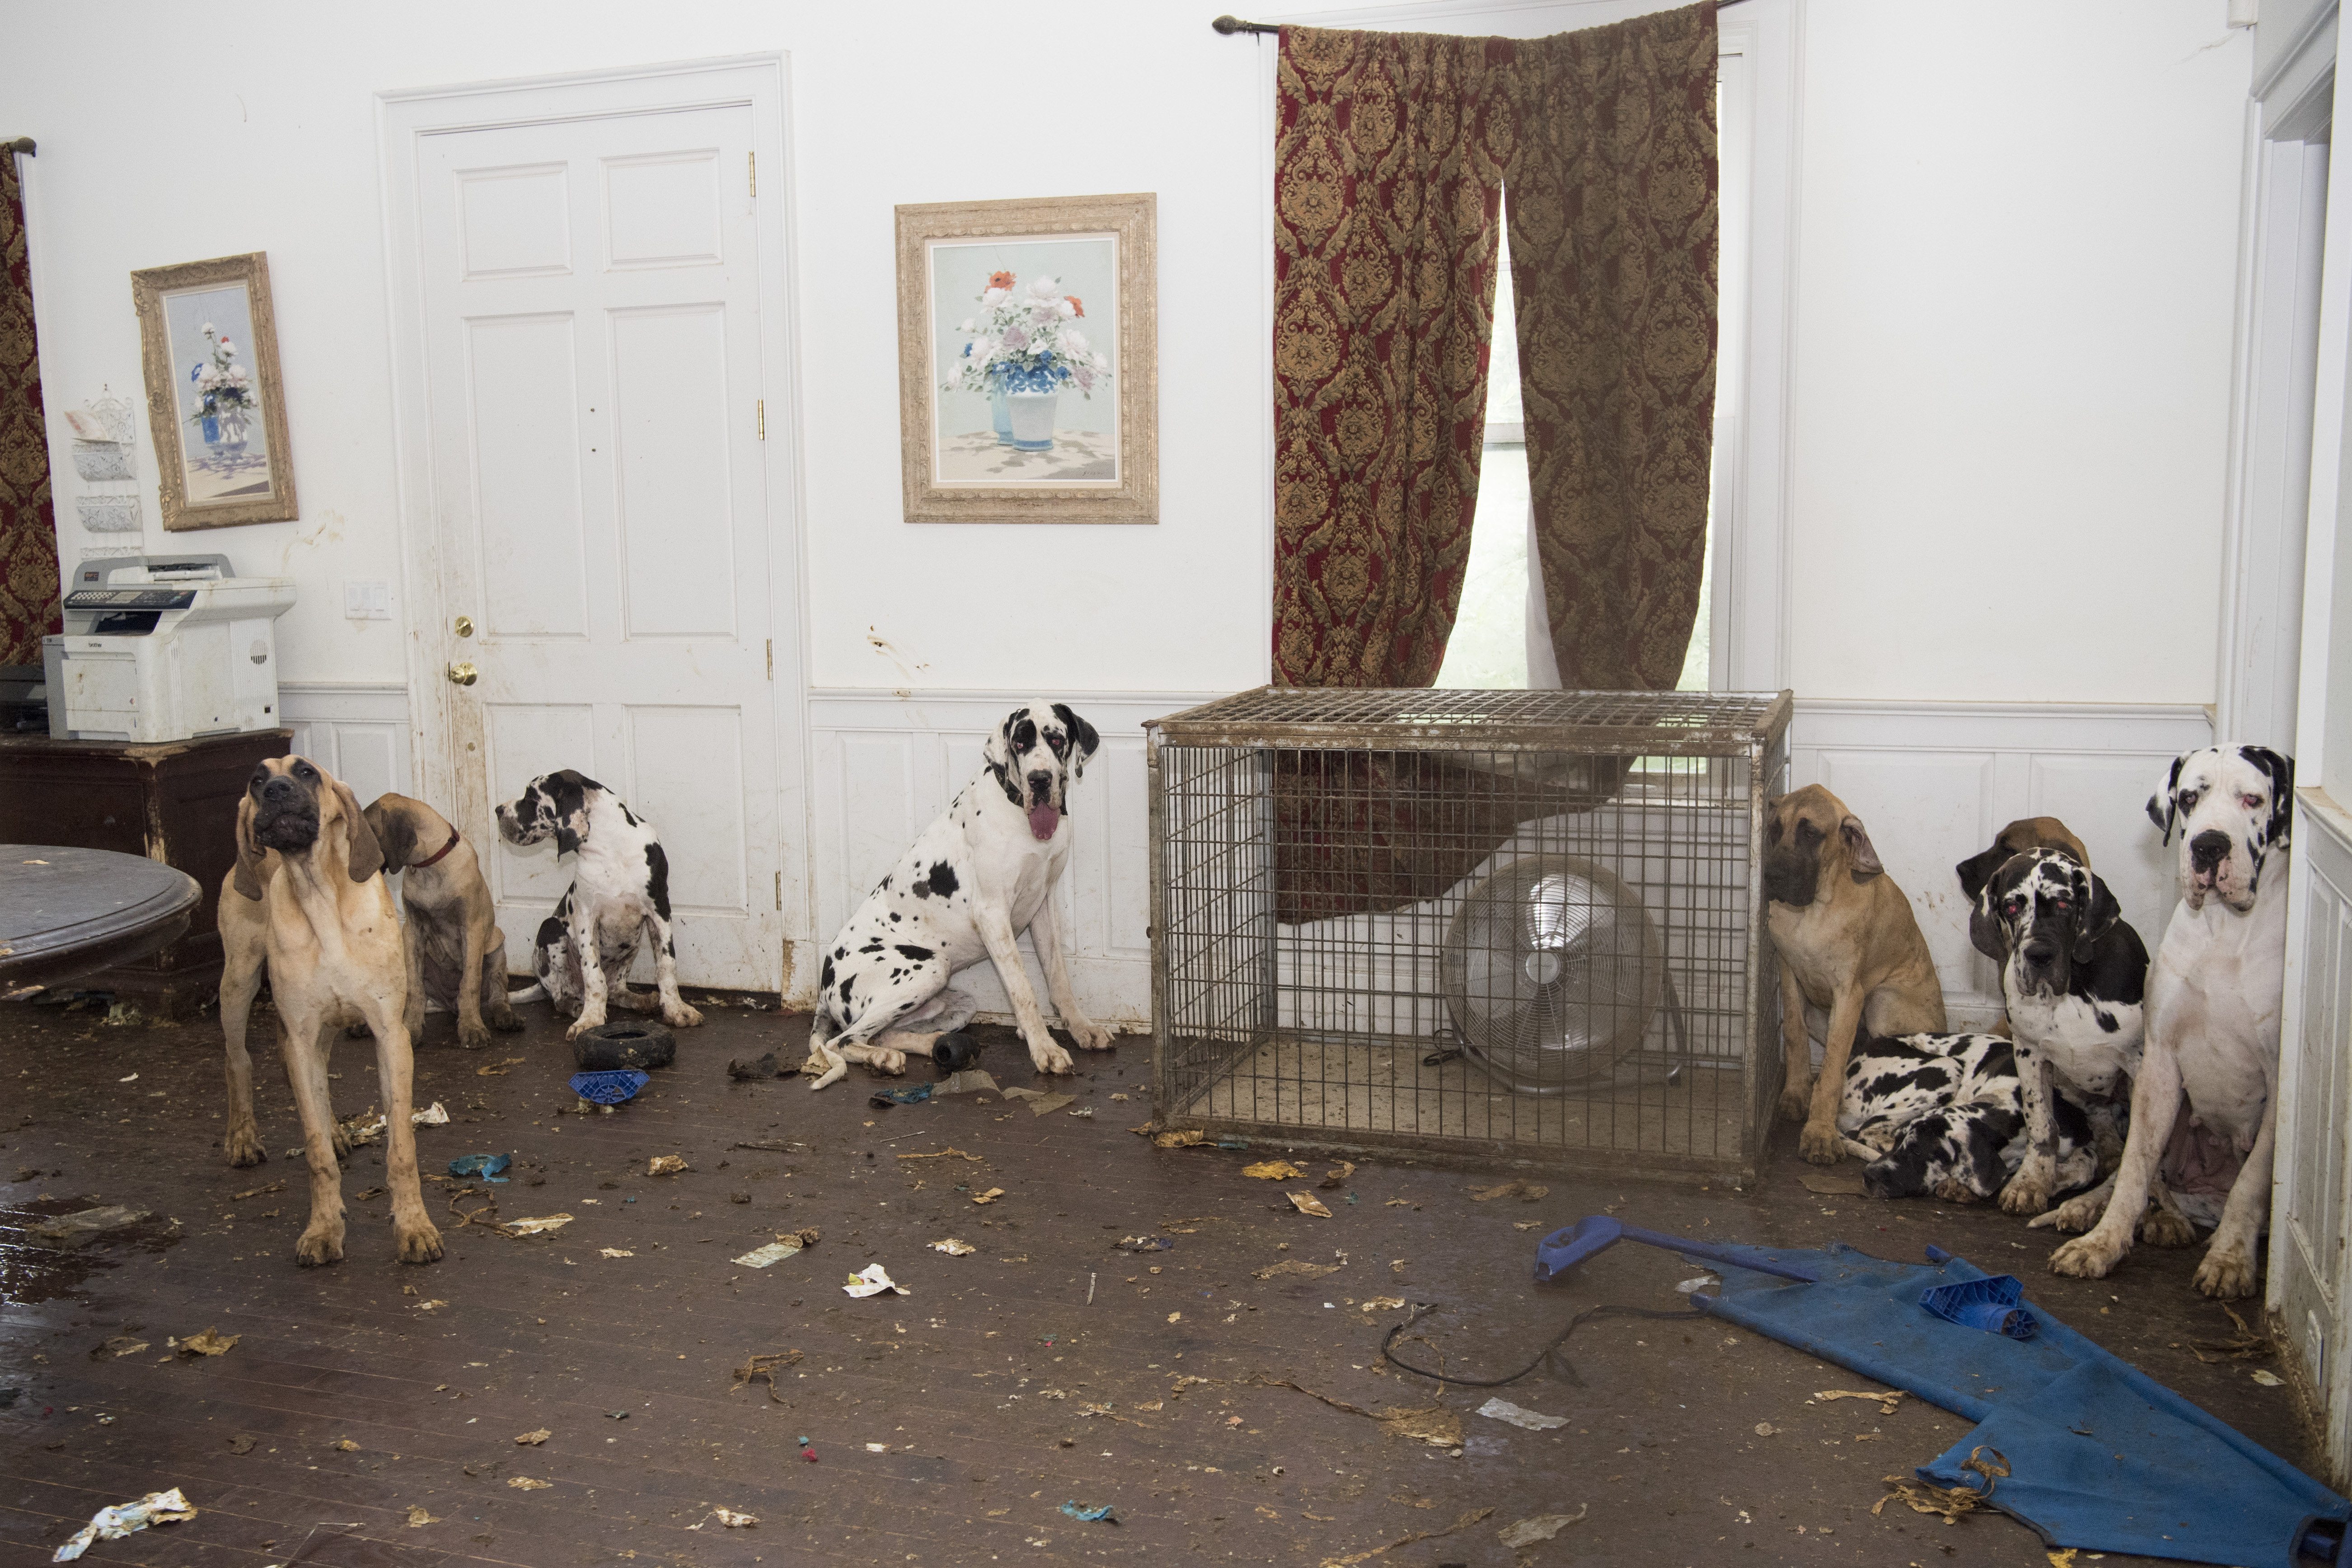 84 neglected Great Danes seized, most from mansion